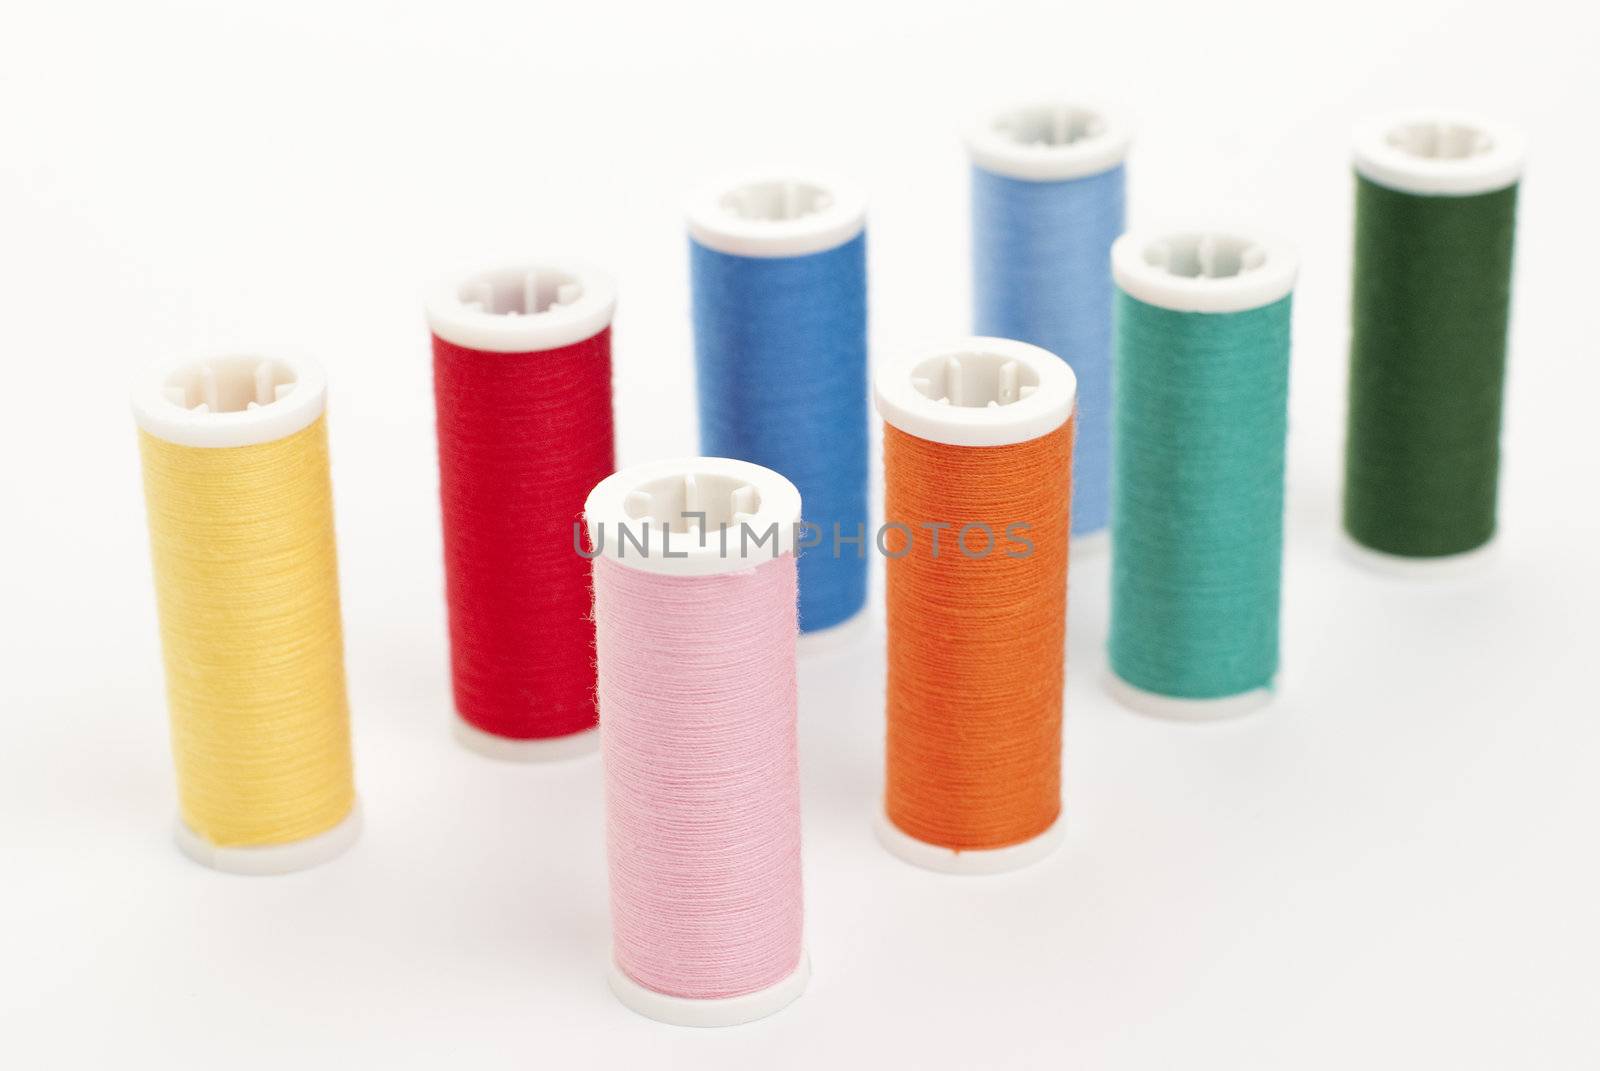 Sewing Thread by homydesign